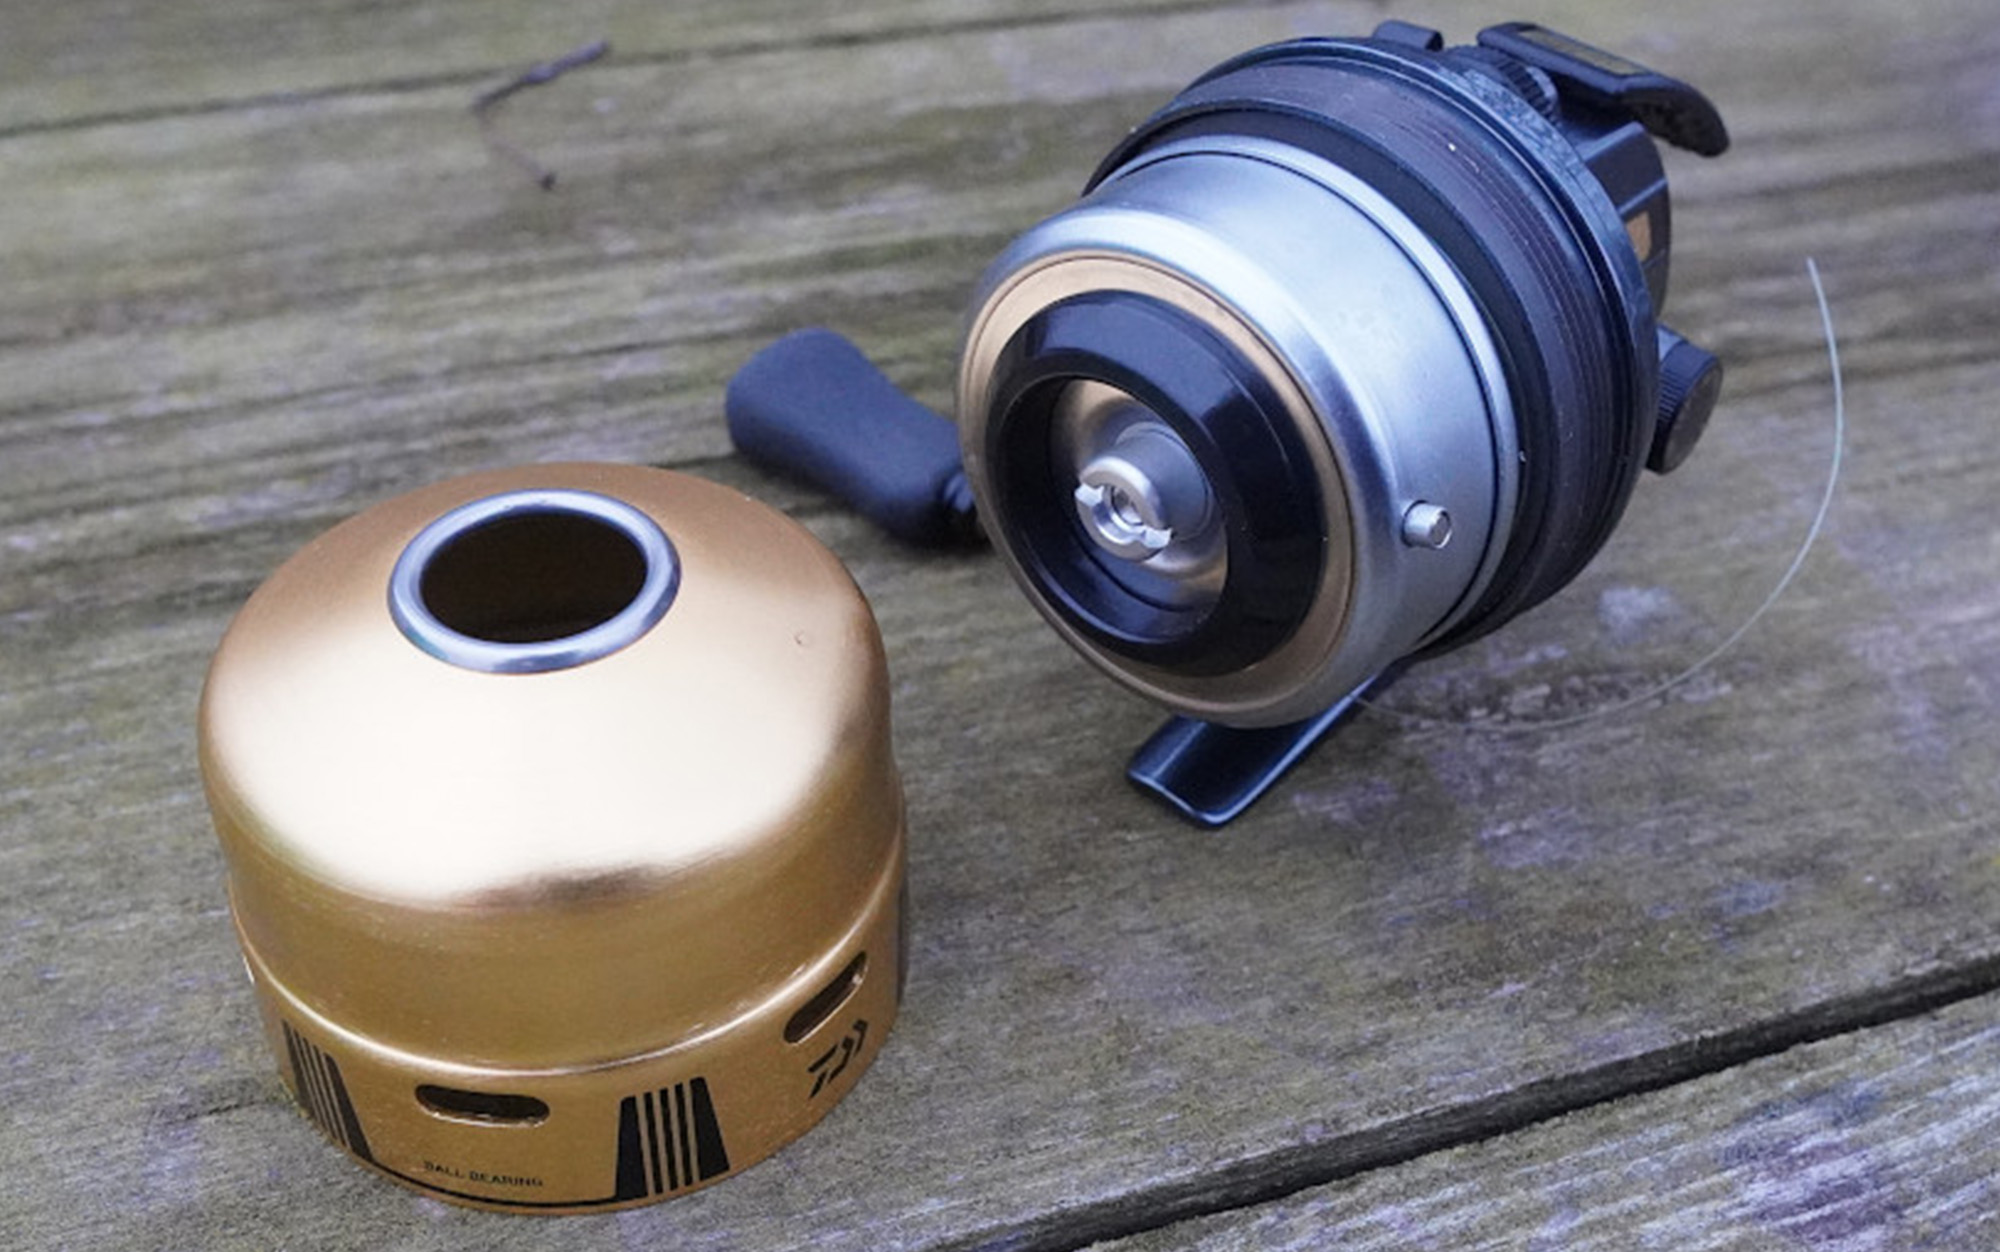 The Goldcast features an excellent spool and interior components.